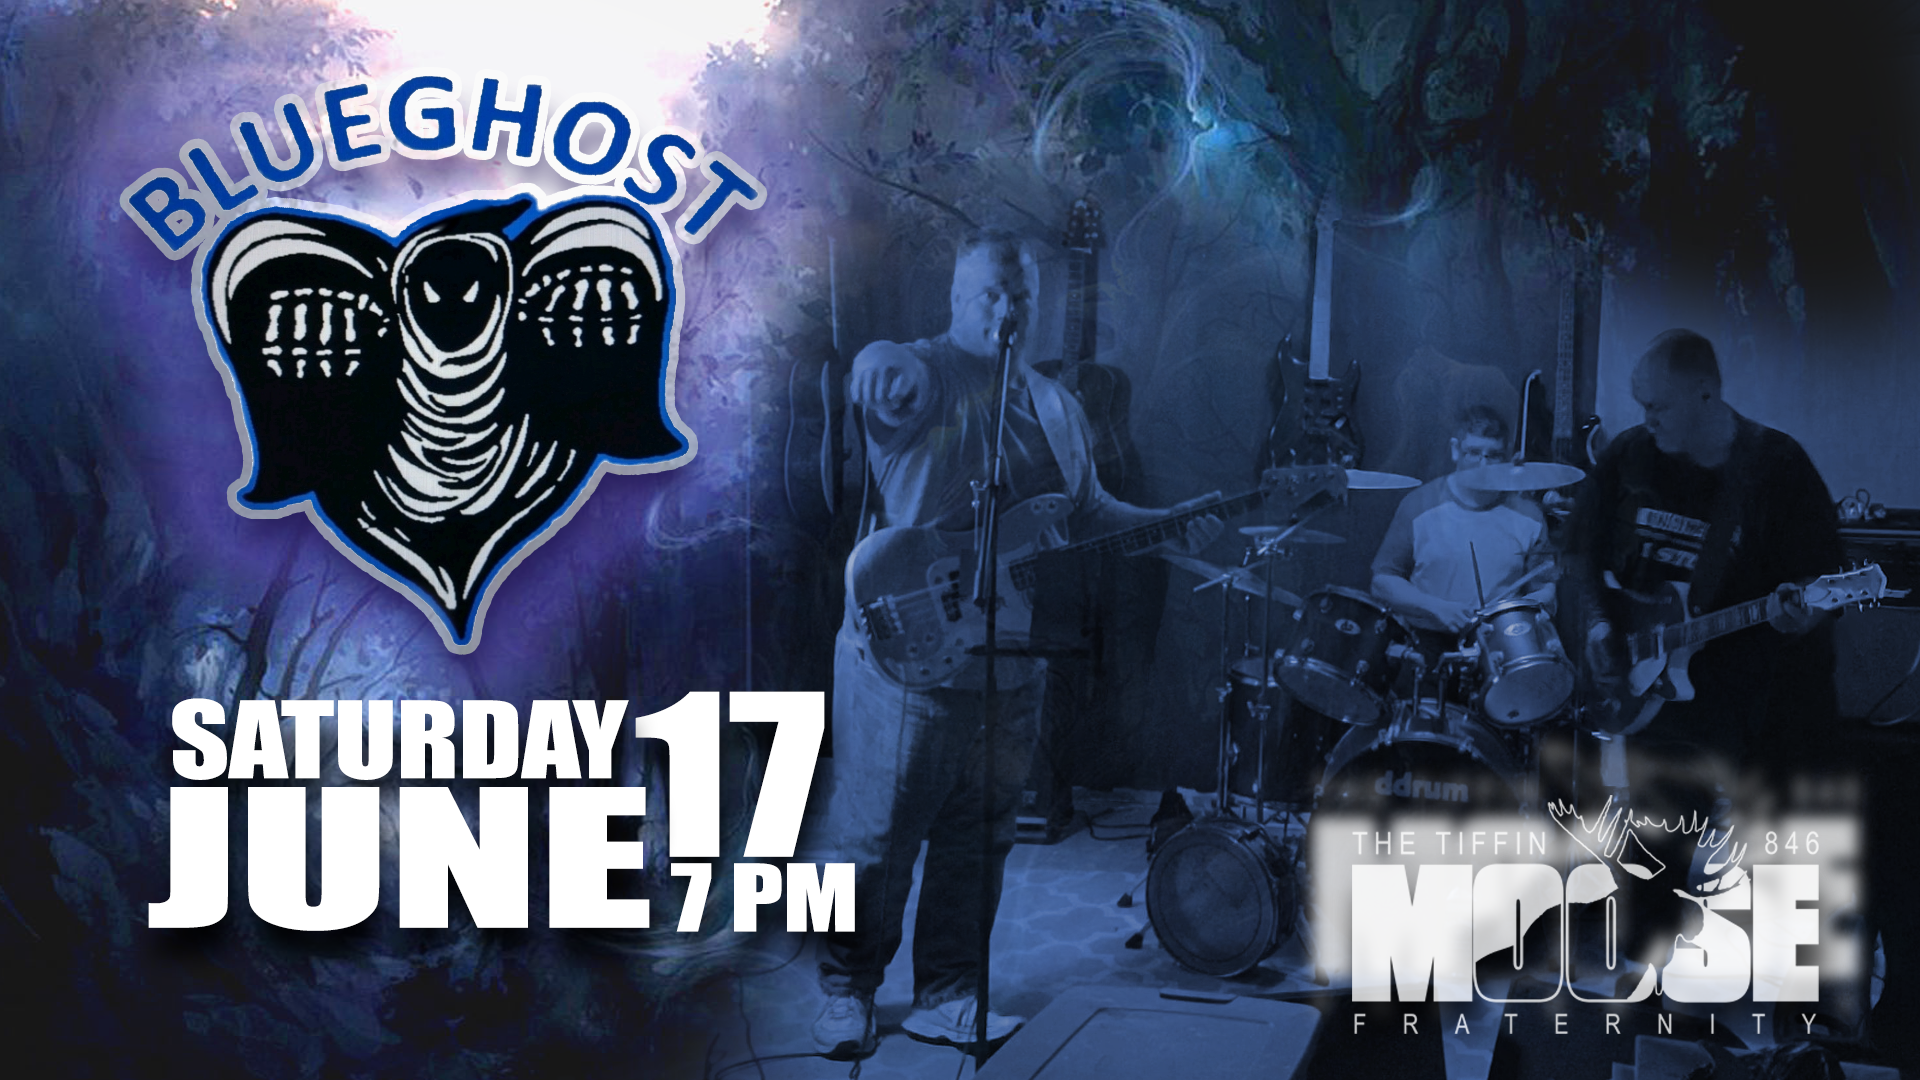 BlueGhost Band at The Tiffin Moose